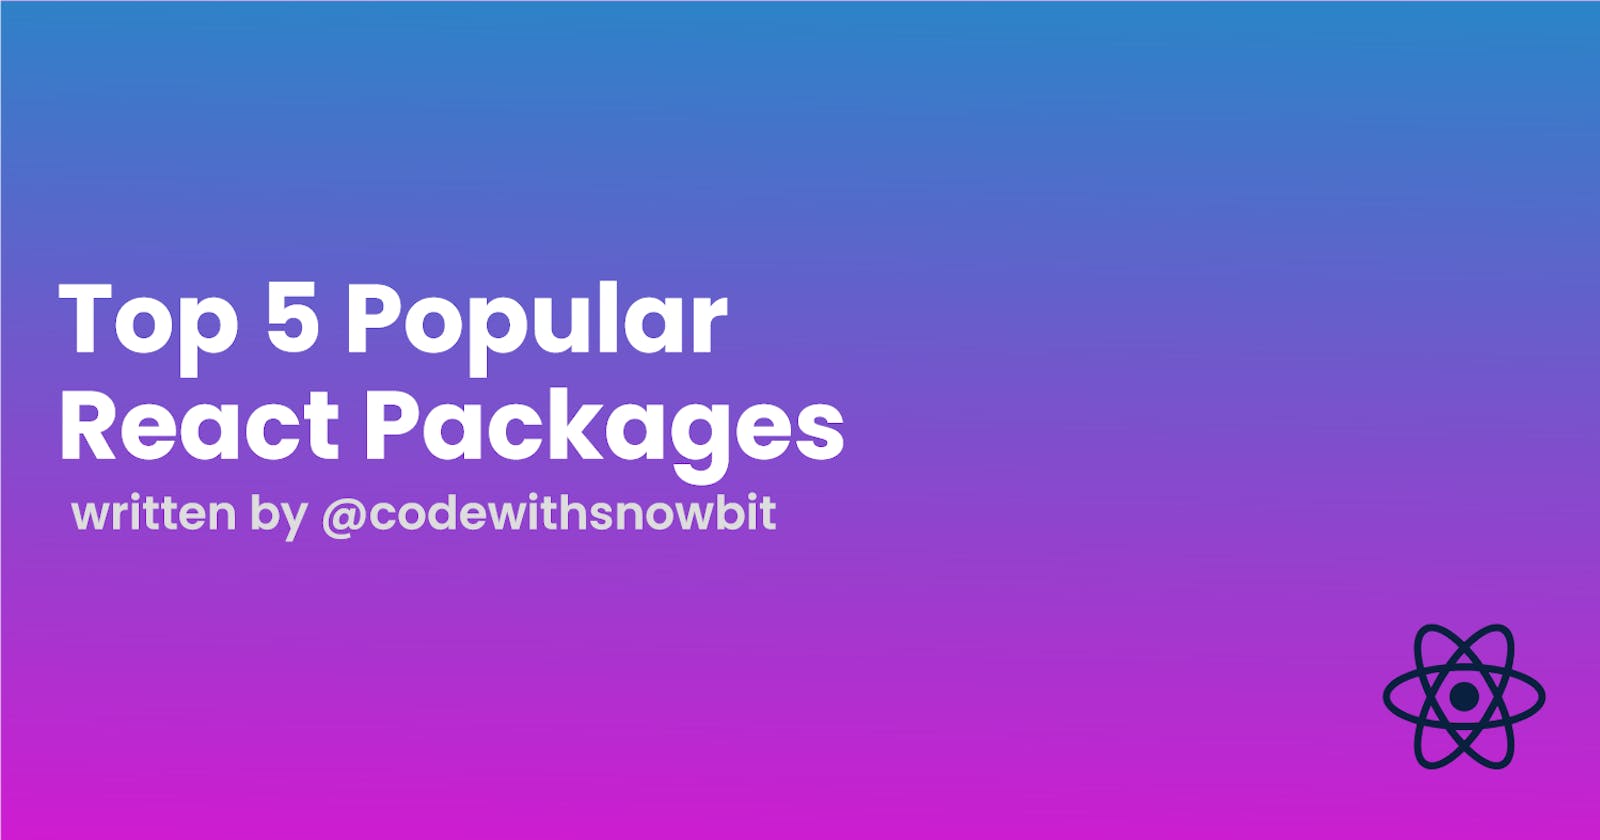 Top 5 Popular React Packages